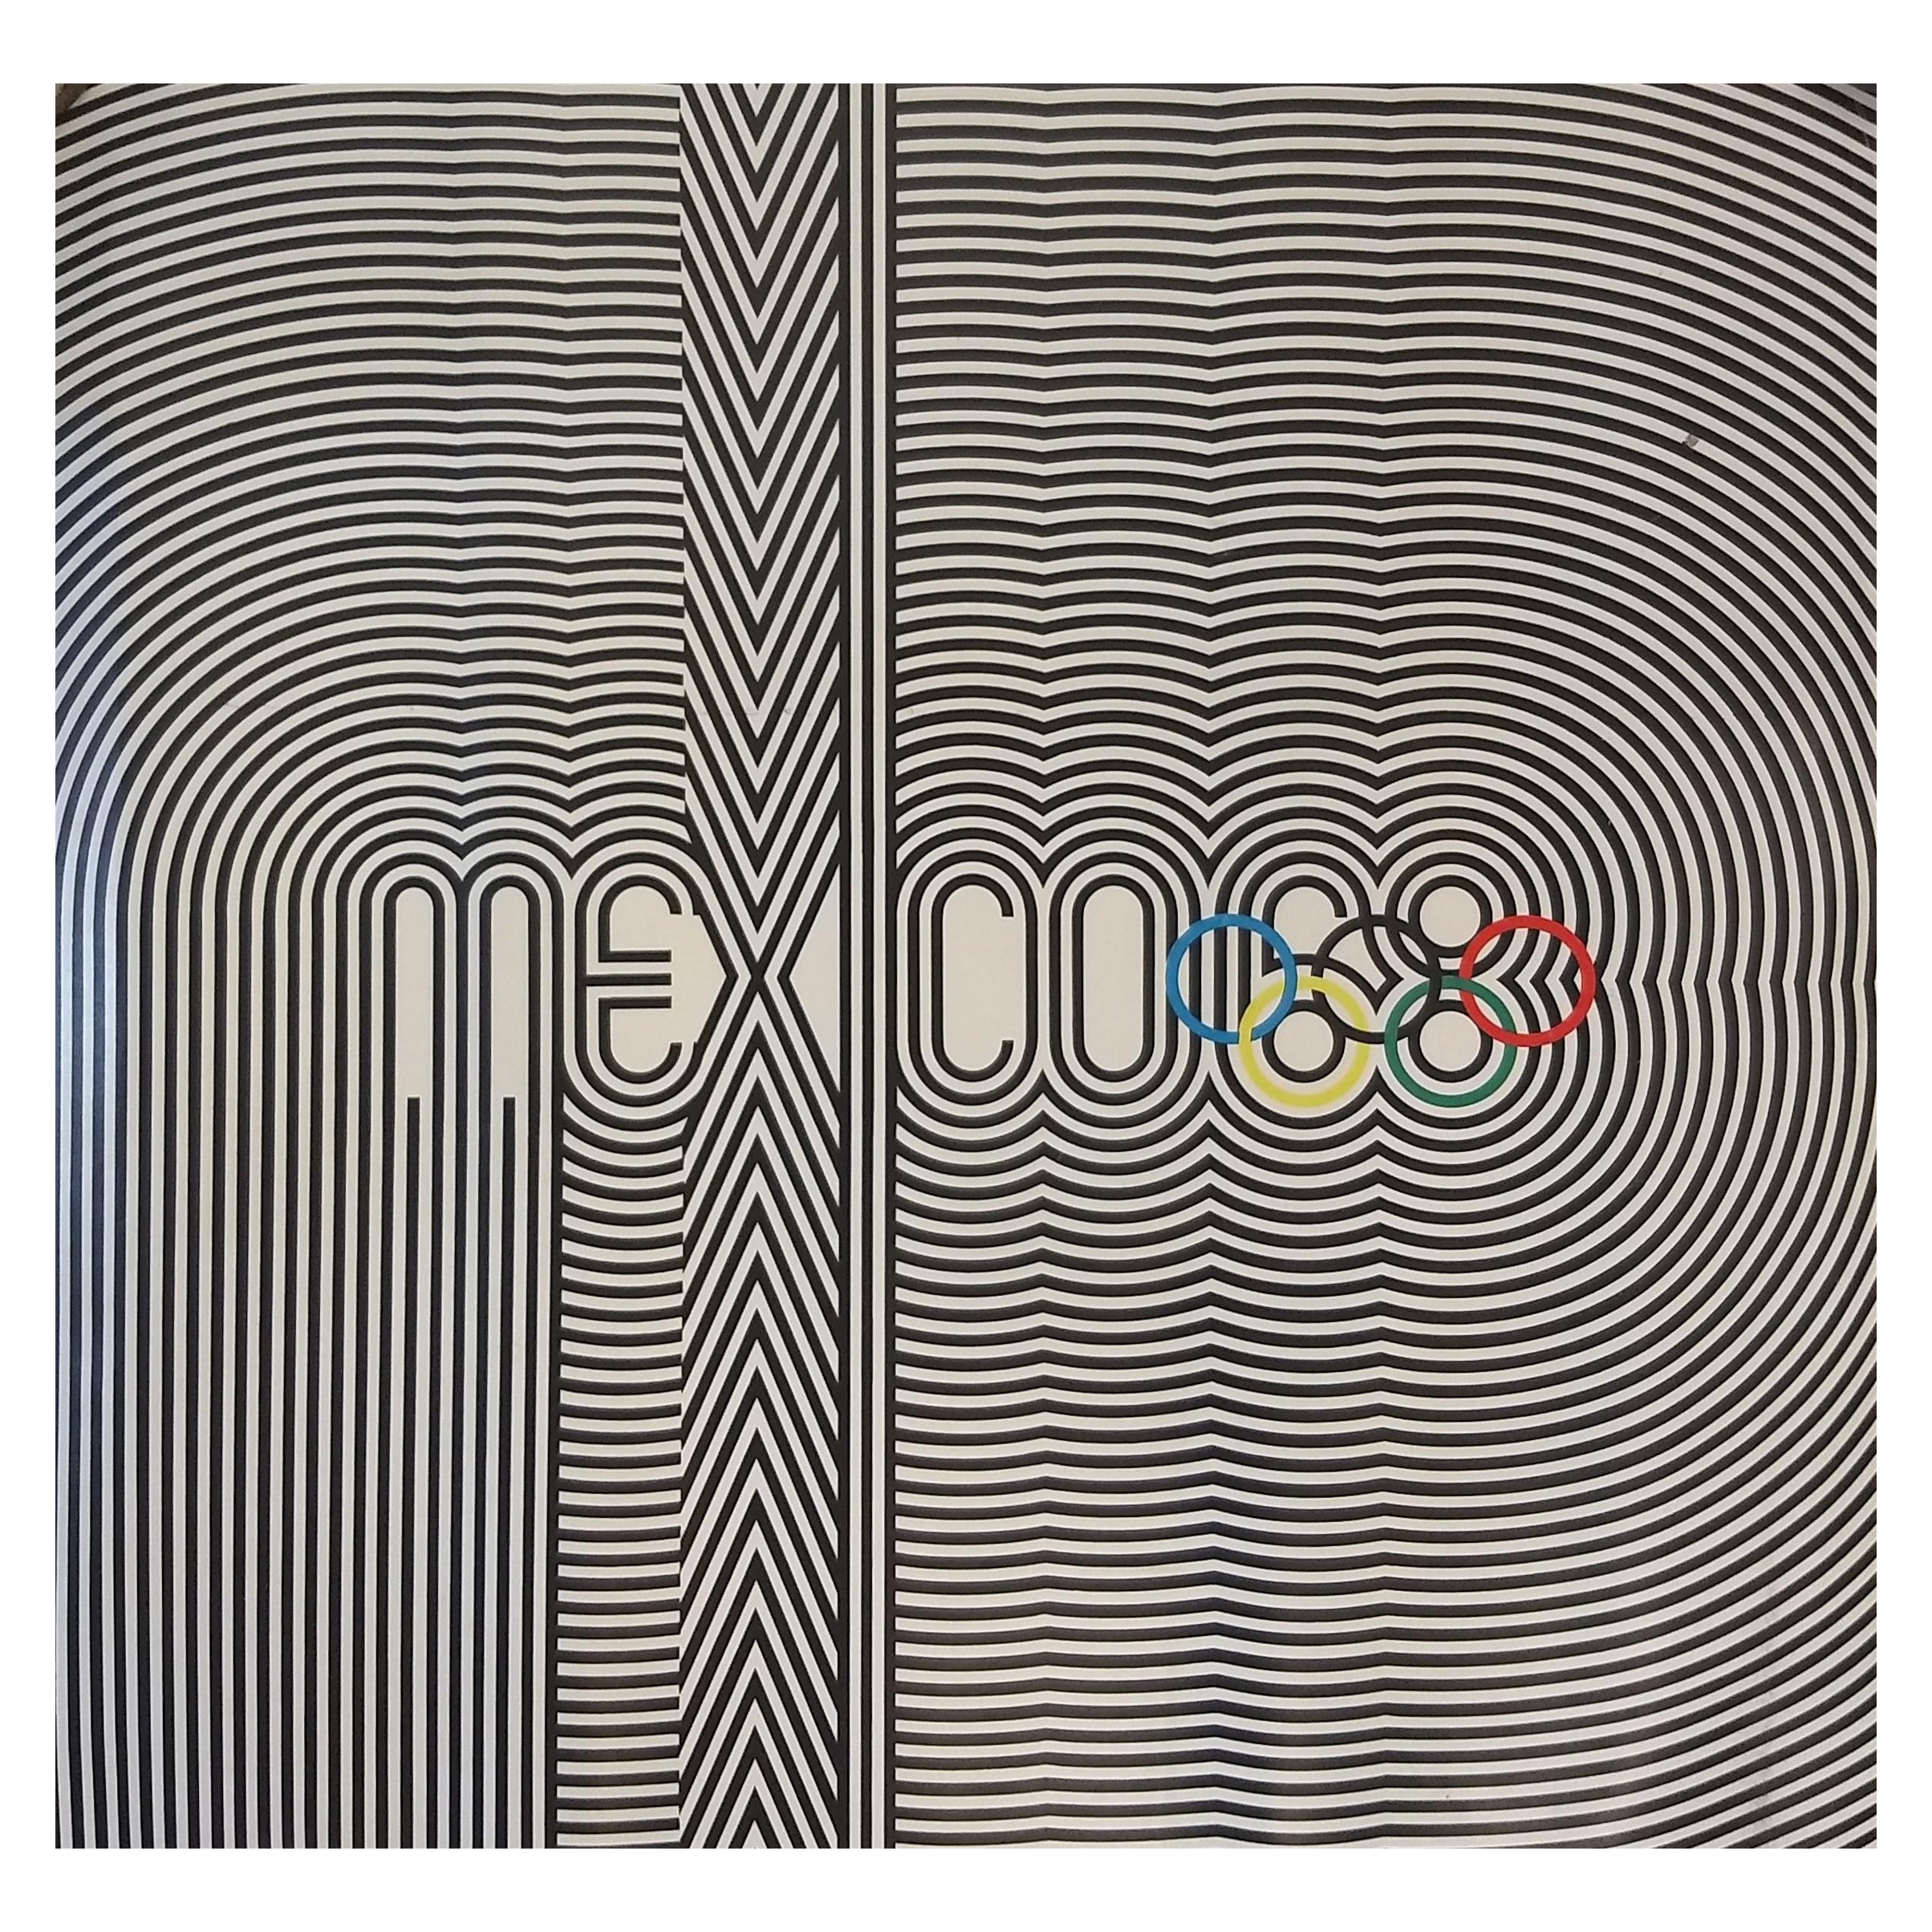 Original Iconic Op-Art Poster Created by Lanz Wyman for Mexico 68 Olympic Games 